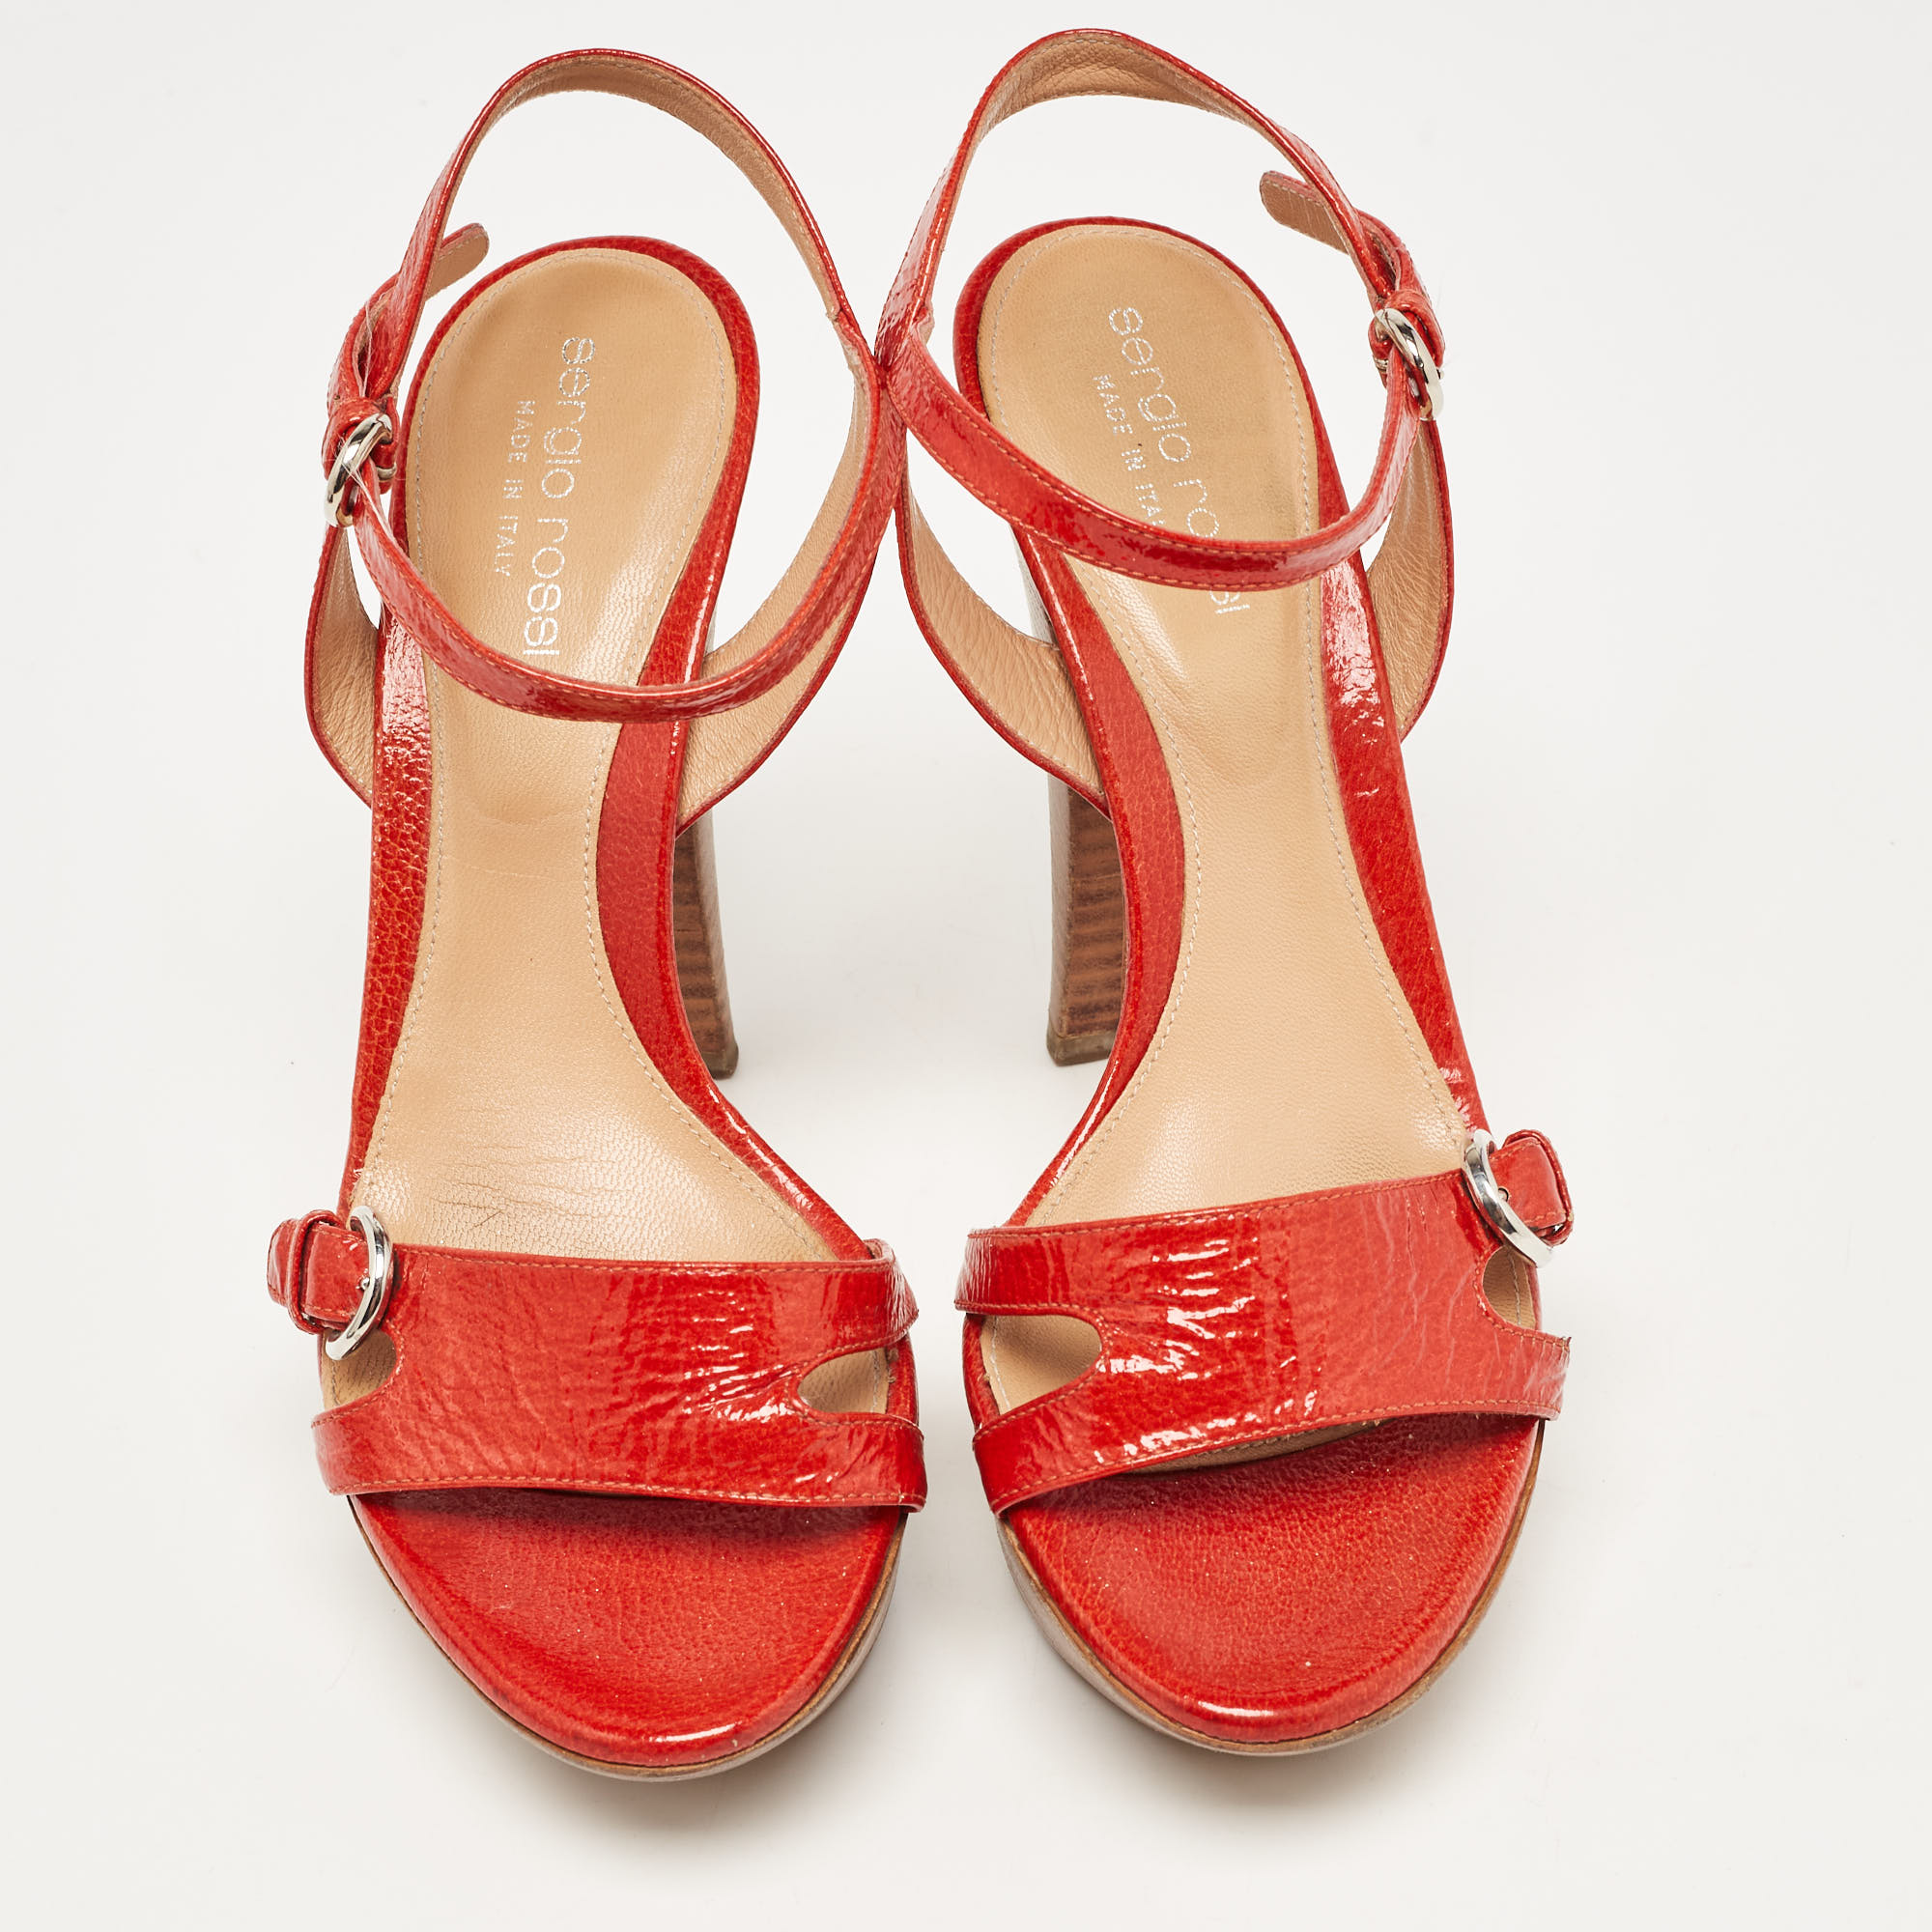 Sergio Rossi Red Patent Leather Slingback Sandals Size 36